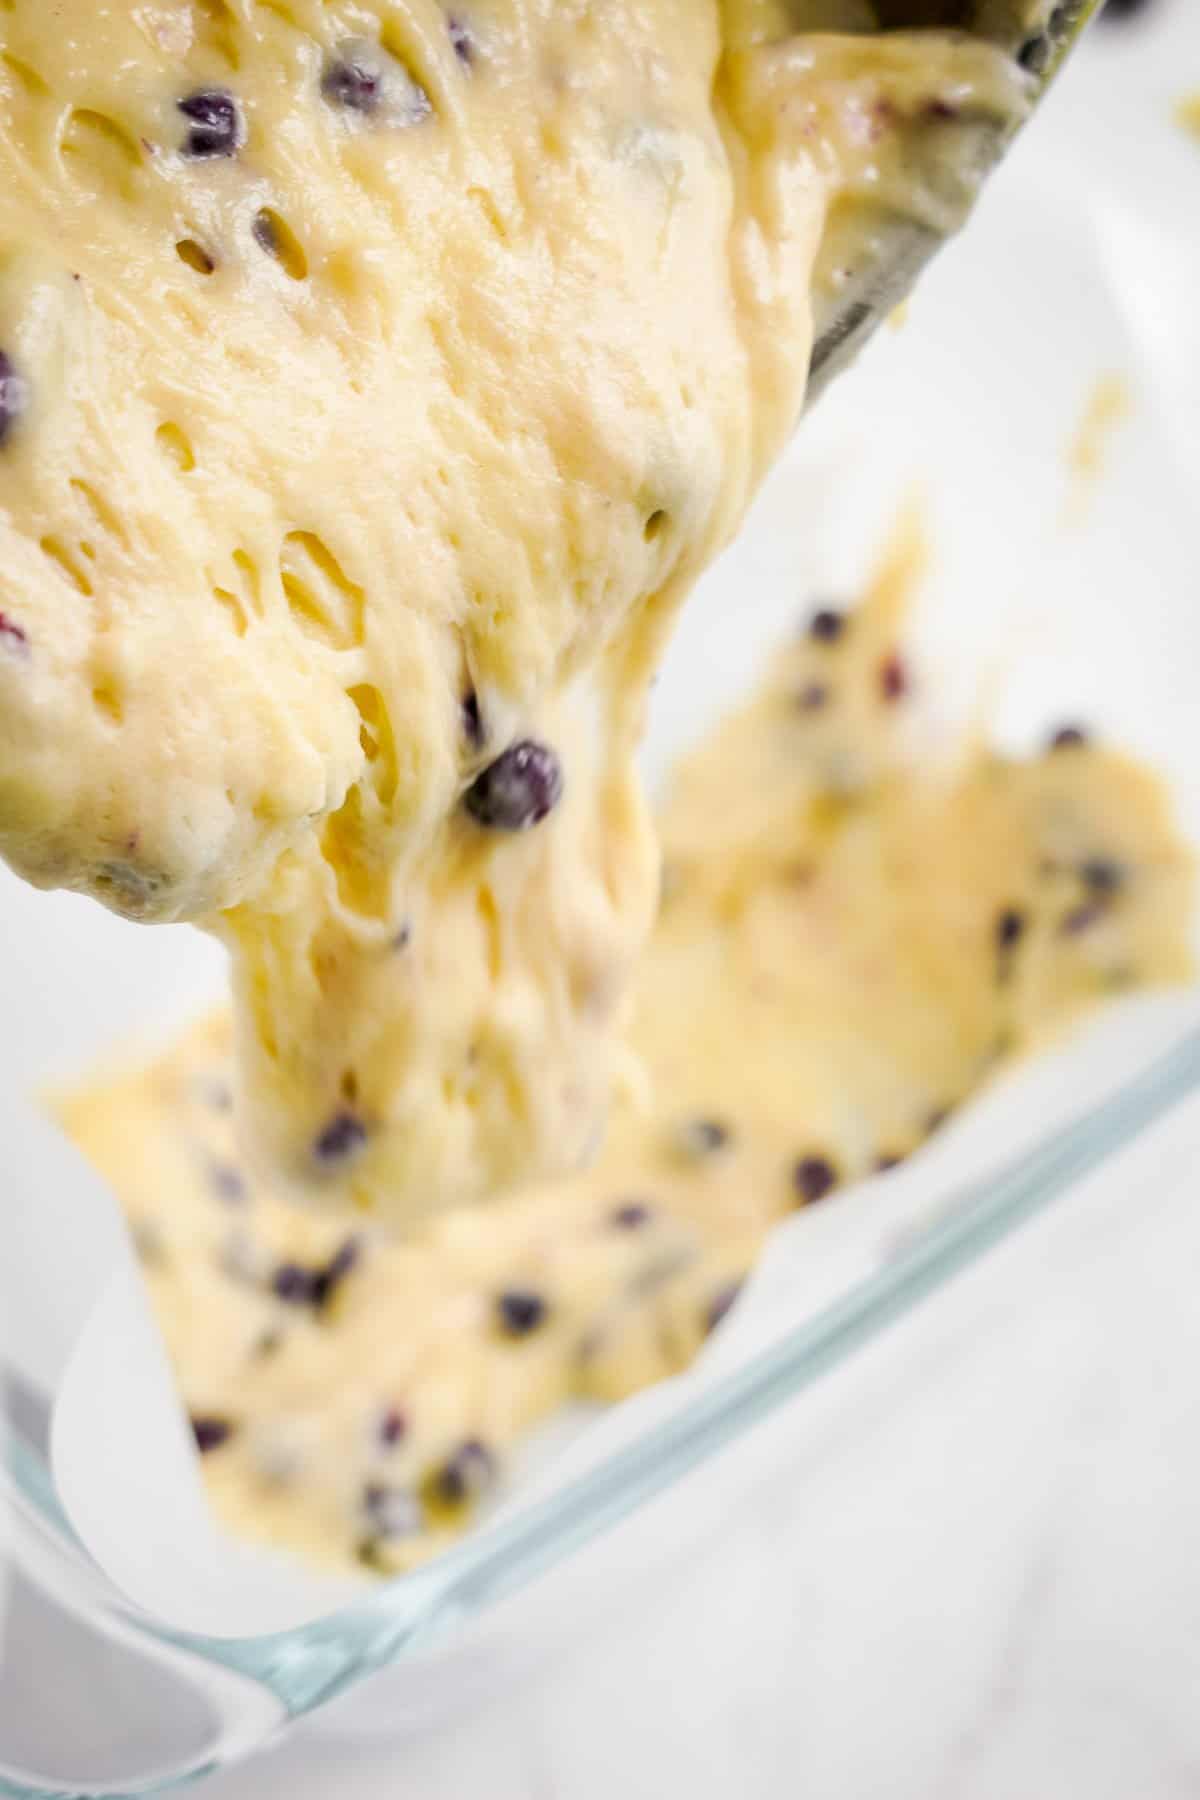 Pouring blueberry bread batter into pan